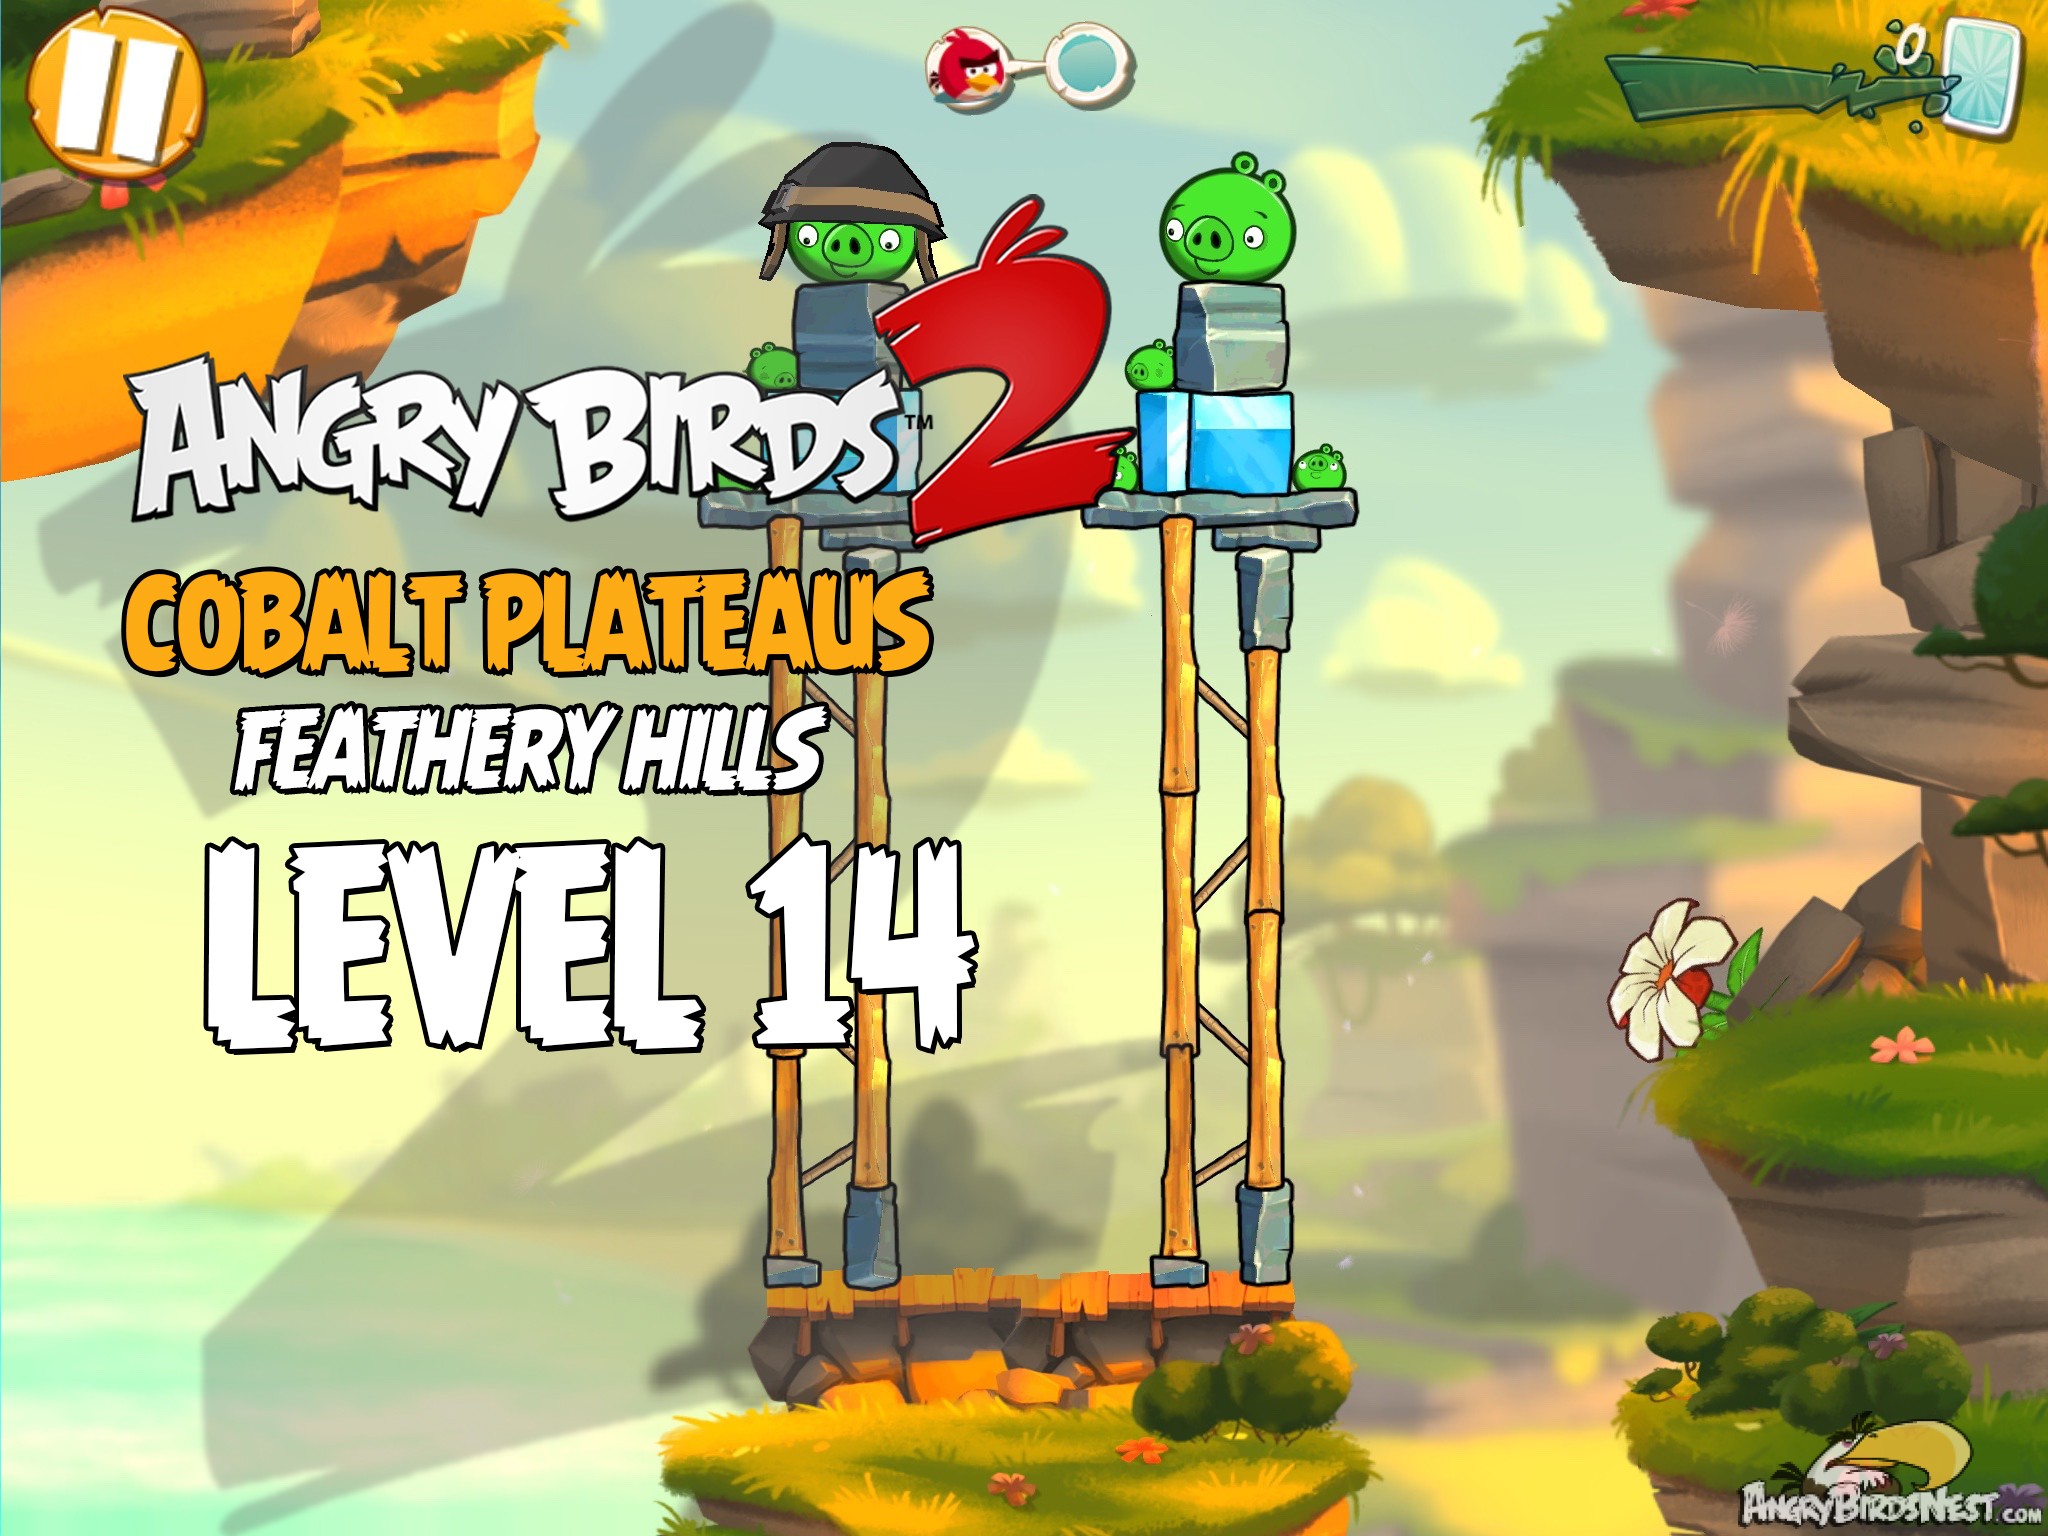 Angry Birds 2 Cobalt Plateaus Feathery Hills Level 14